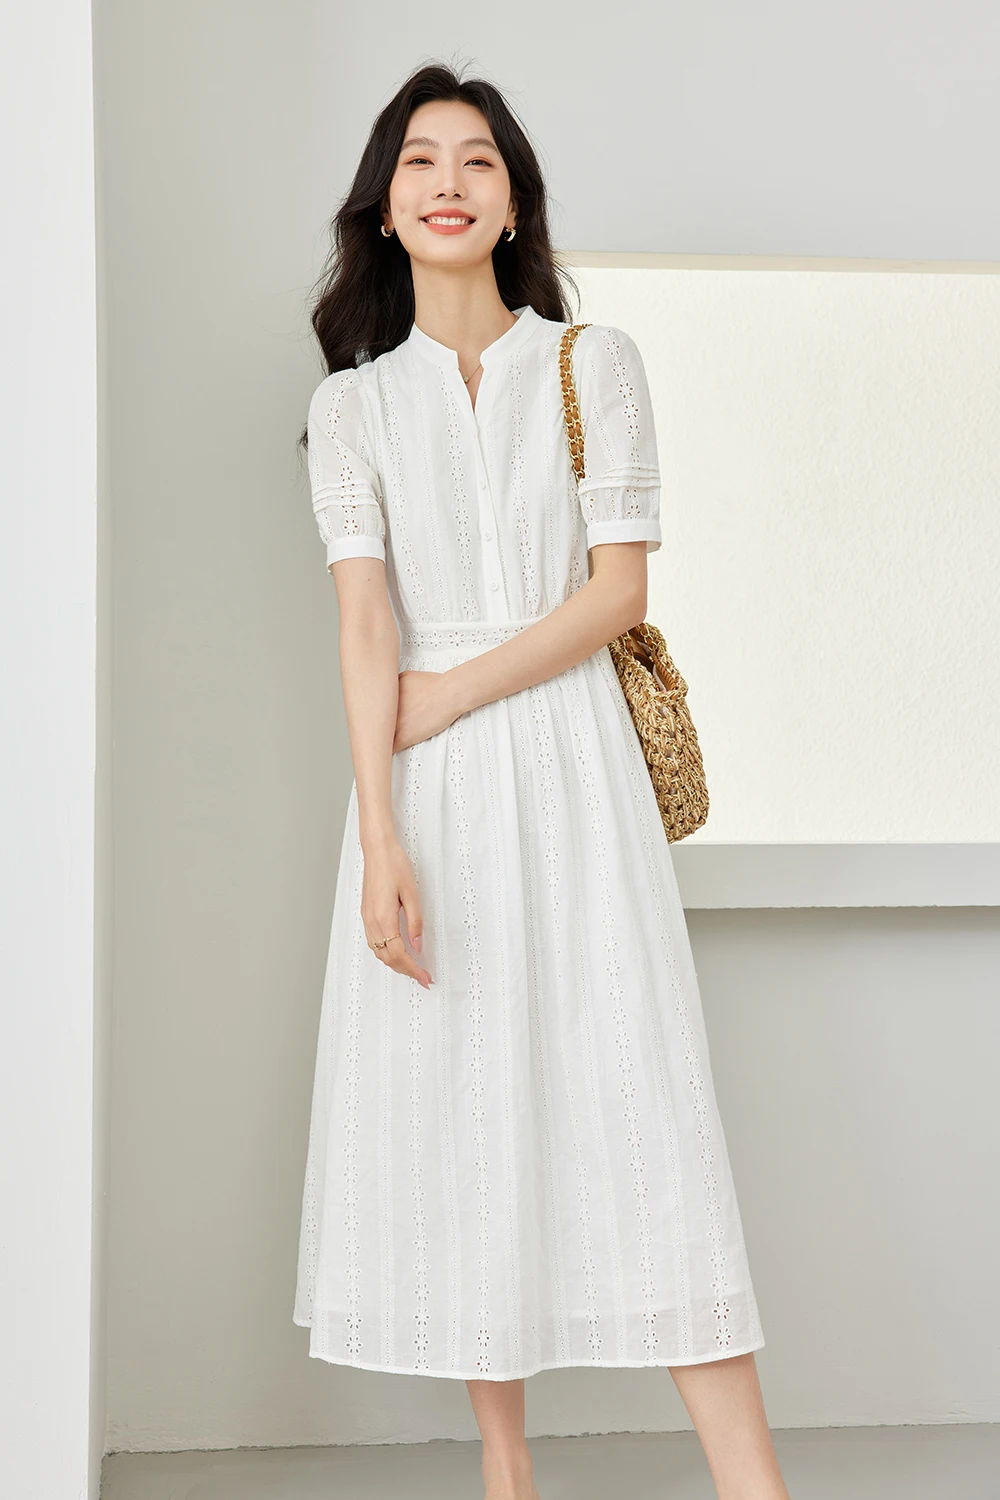 

VIMLY Women's Elegant Commuter Dress Summer Simple Embroidered Short Sleeve Stand-up Collar Waisted A-line Party Evening Dress